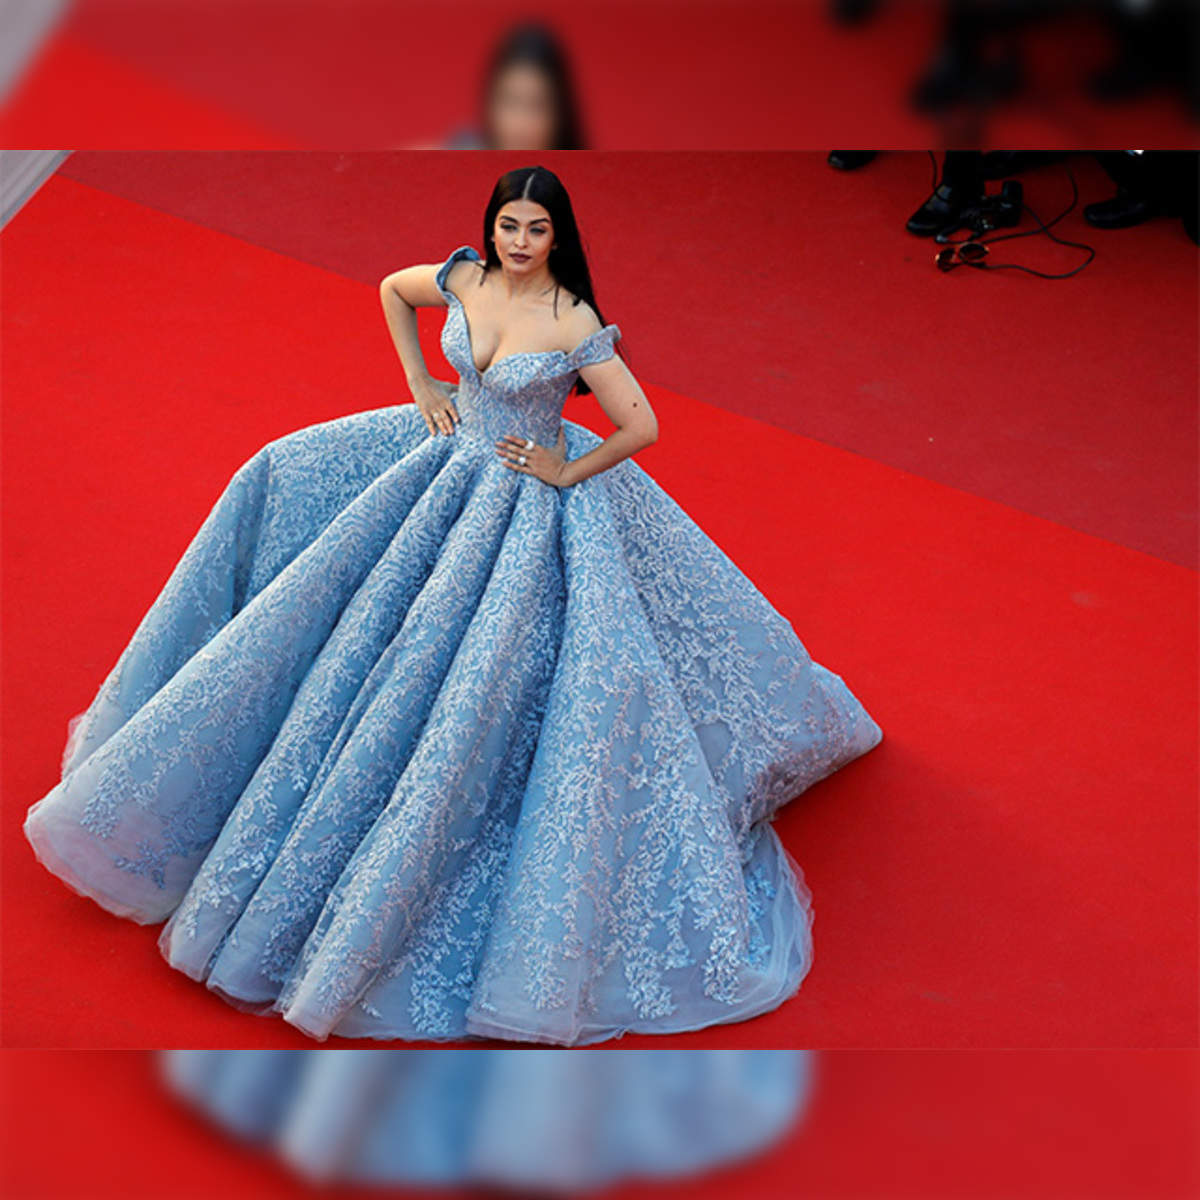 Cannes 2022 Day 3: Aishwarya Rai looks breathtaking in gorgeous pastel pink  gown - Articles